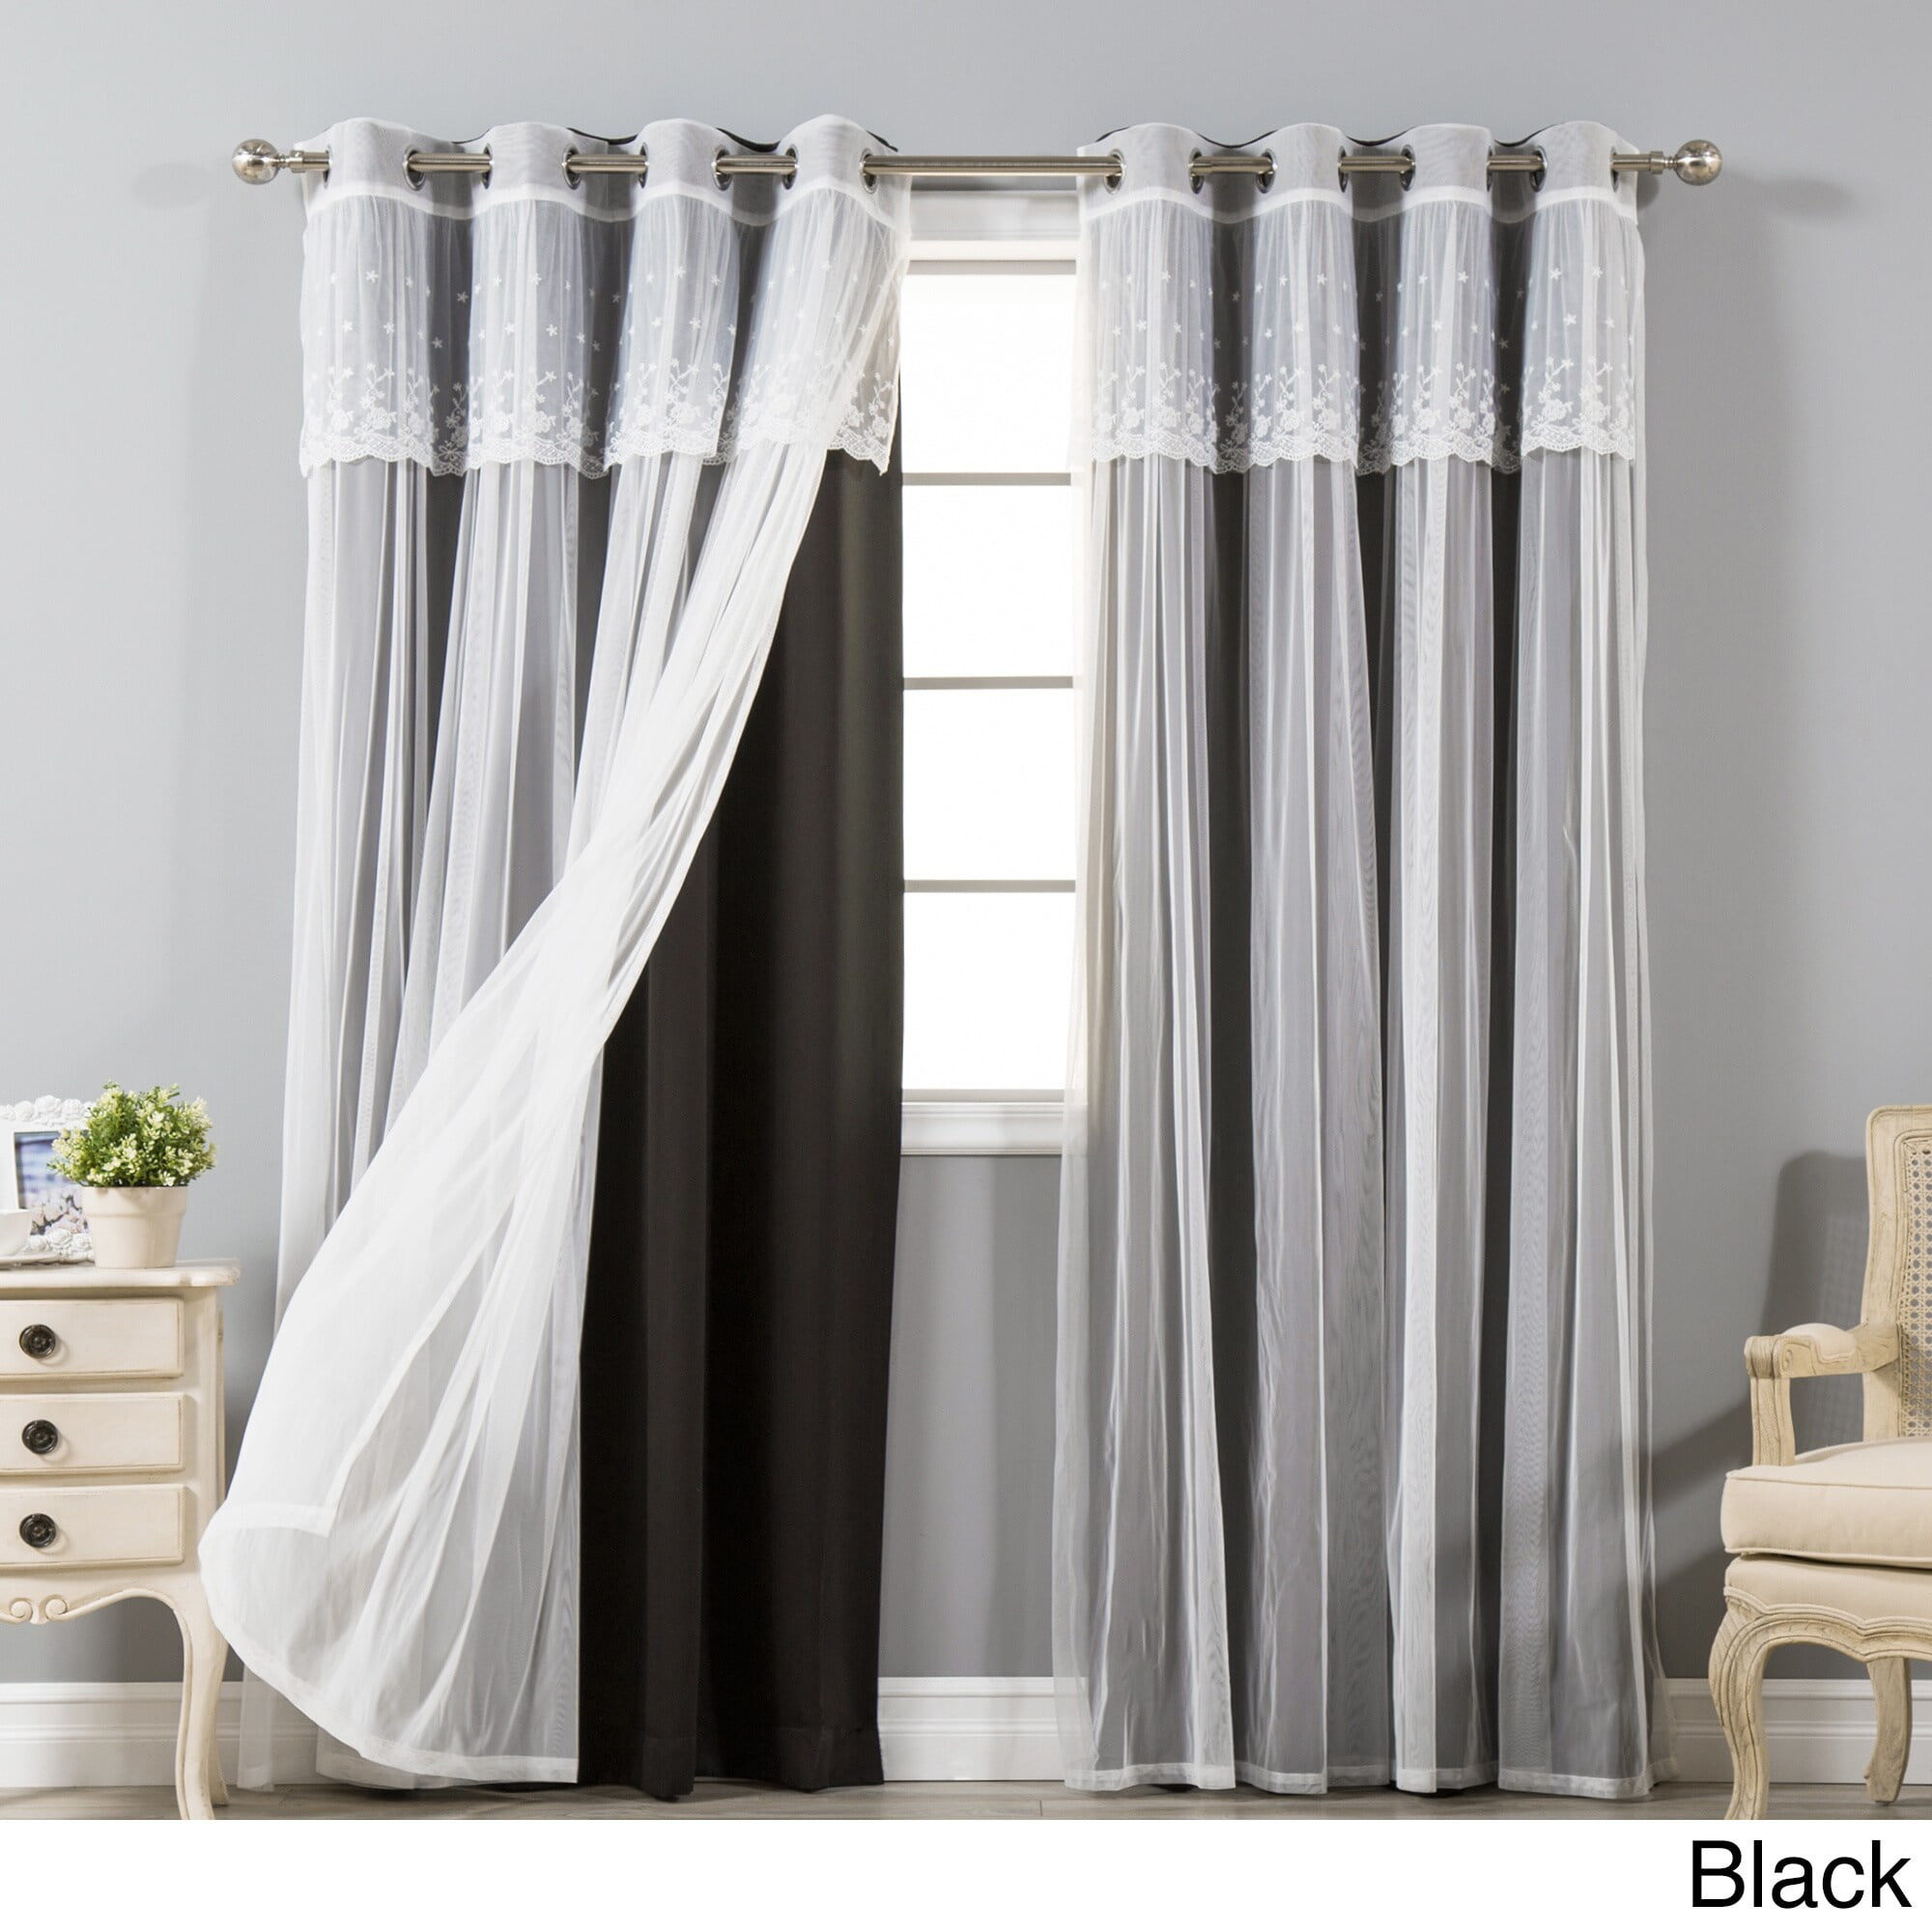 Aurora Home Mix & Match Tulle Sheer with Attached Valance and Blackout